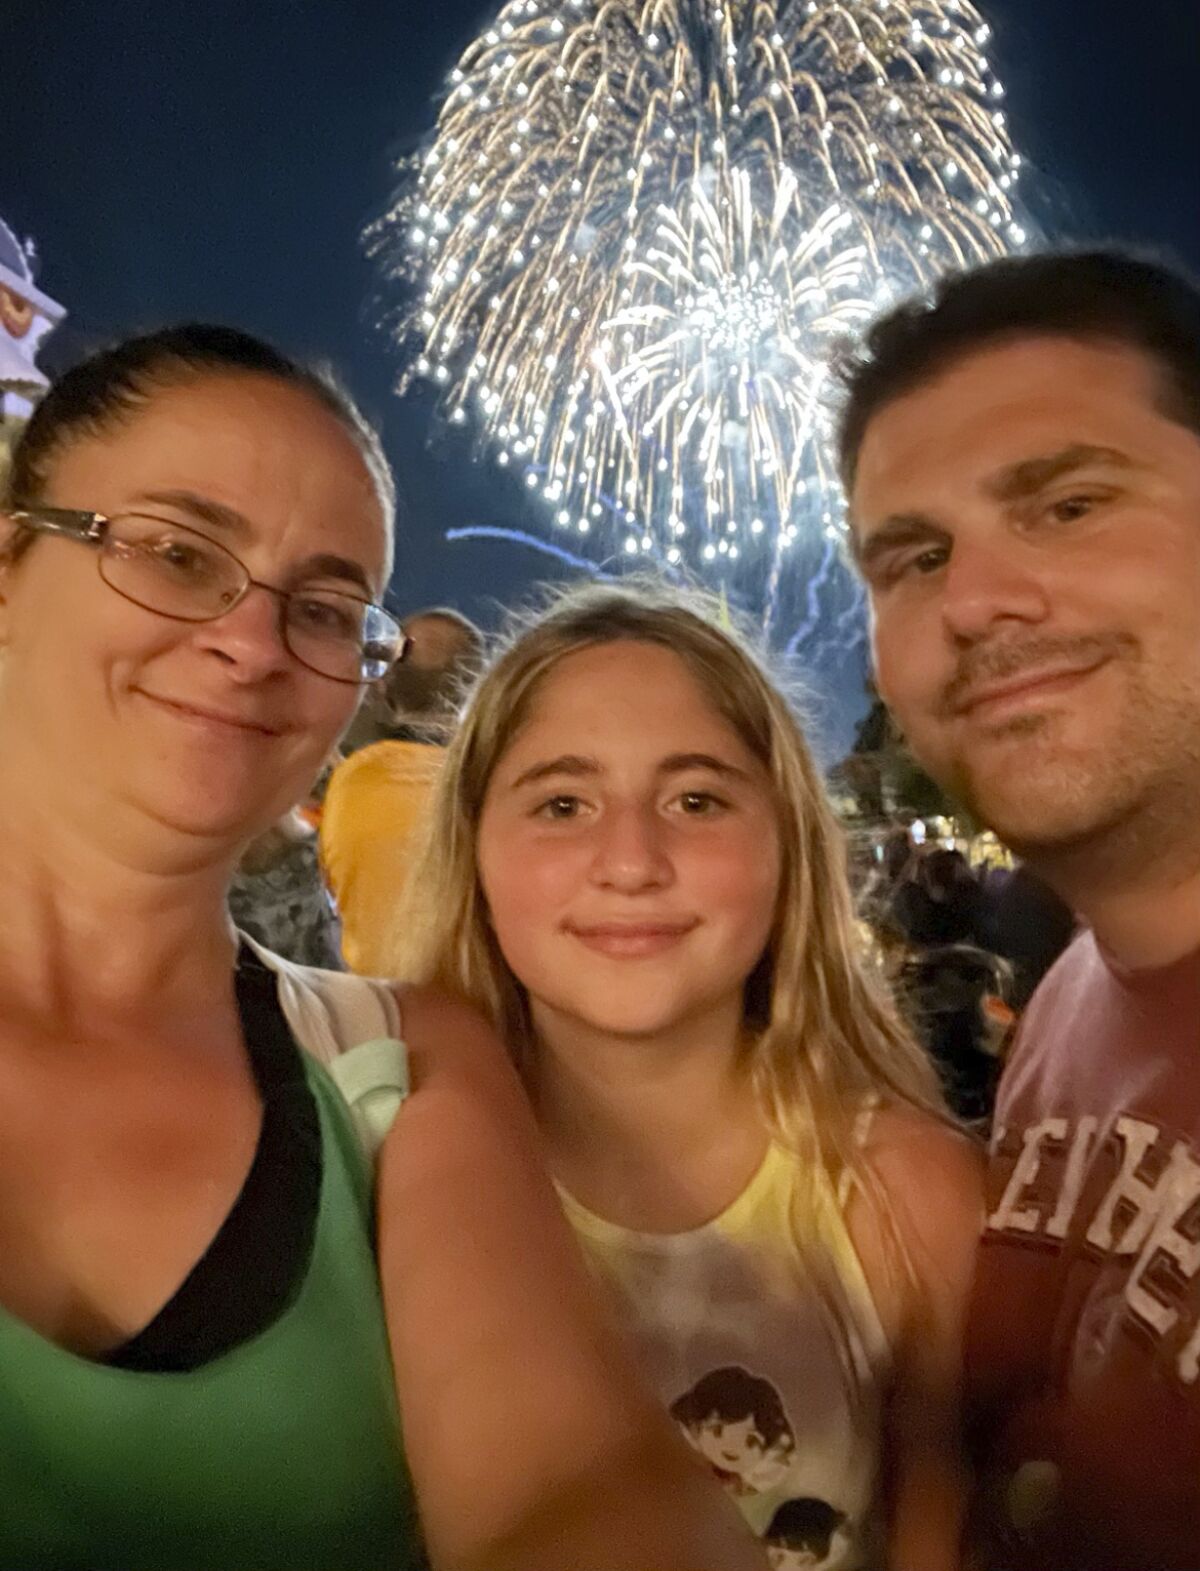 In this image provided by Jennifer Travis, the Travis family, from left, Jennifer, Aubry and Travis pose at Walt Disney World in Orlando, Fla., on Aug. 20, 2021. The family were among hundreds of motorists who waited desperately for help Tuesday, Jan. 4, 2021, after the winter storm snarled traffic and left some drivers stranded for nearly 24 hours along an impassable stretch of Interstate 95 south of the nation’s capital. (Jennifer Travis via AP)